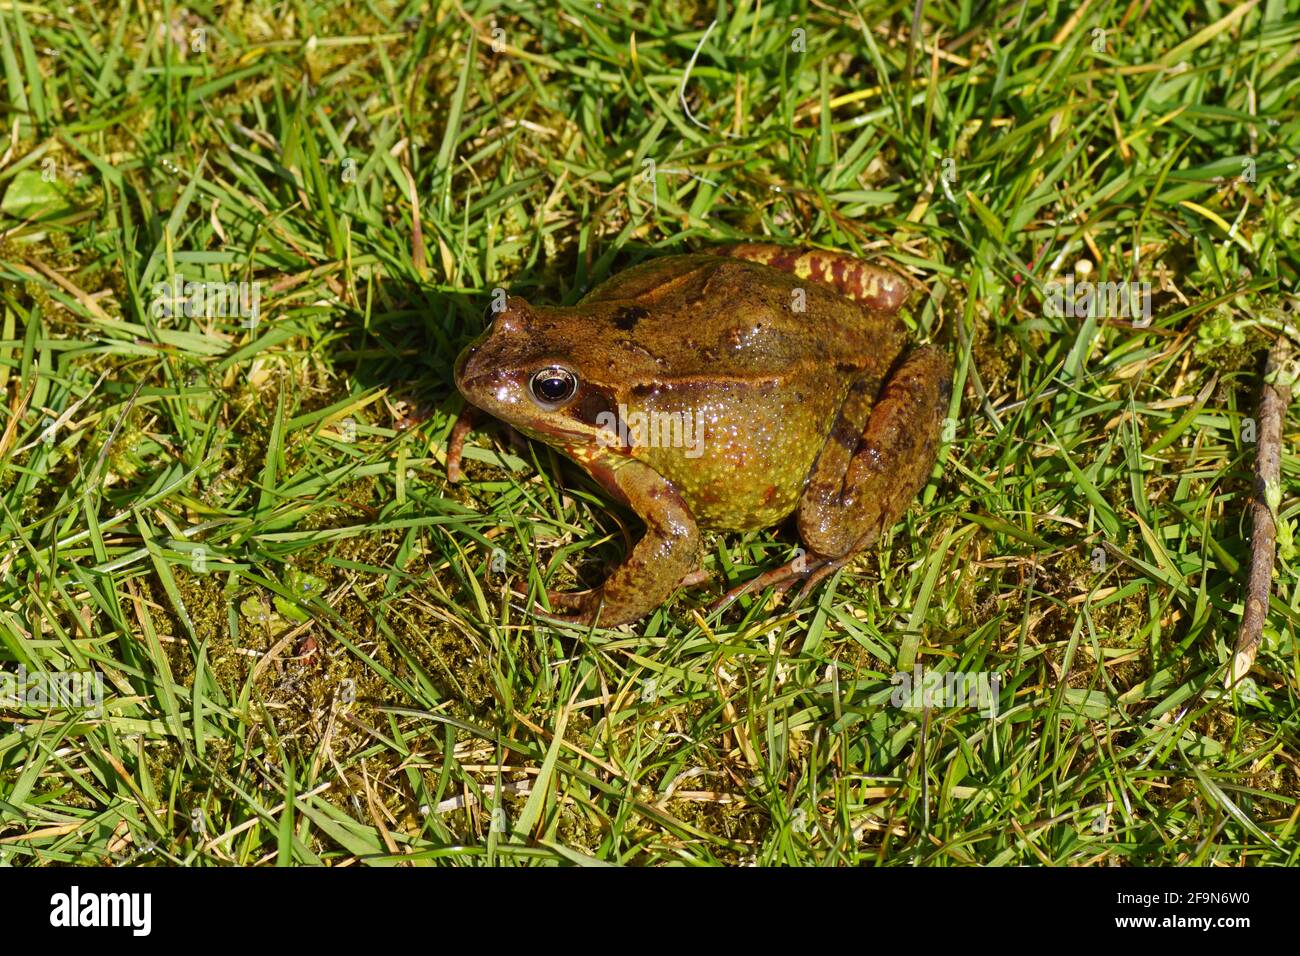 Common frog (Rana temporaria). Family true frogs (Ranidae). On the lawn in a Dutch garden in the spring. April, Netherlands. Stock Photo